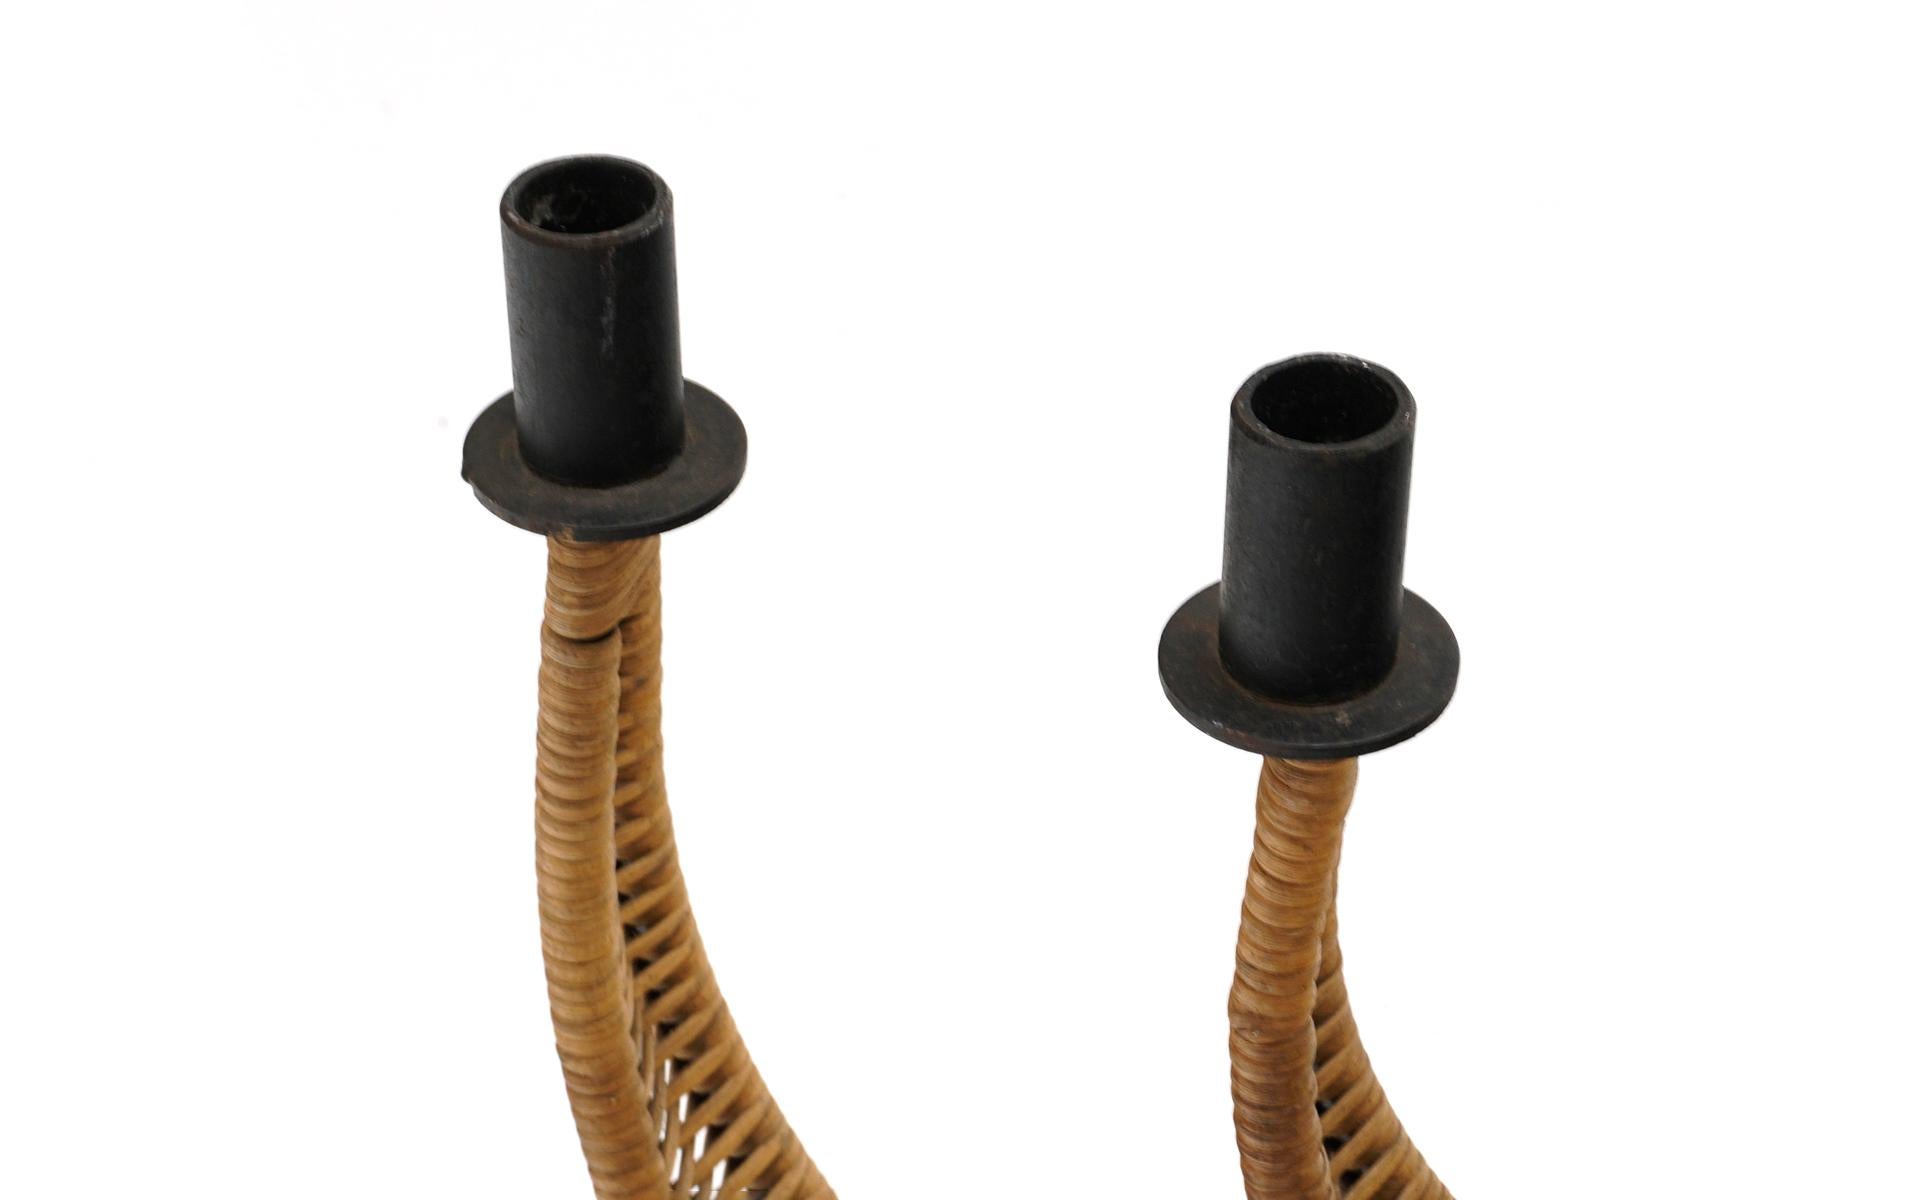 American Four Candle Candelabra in Wrought Iron and Cane by Arthur Umanoff, 1950s For Sale